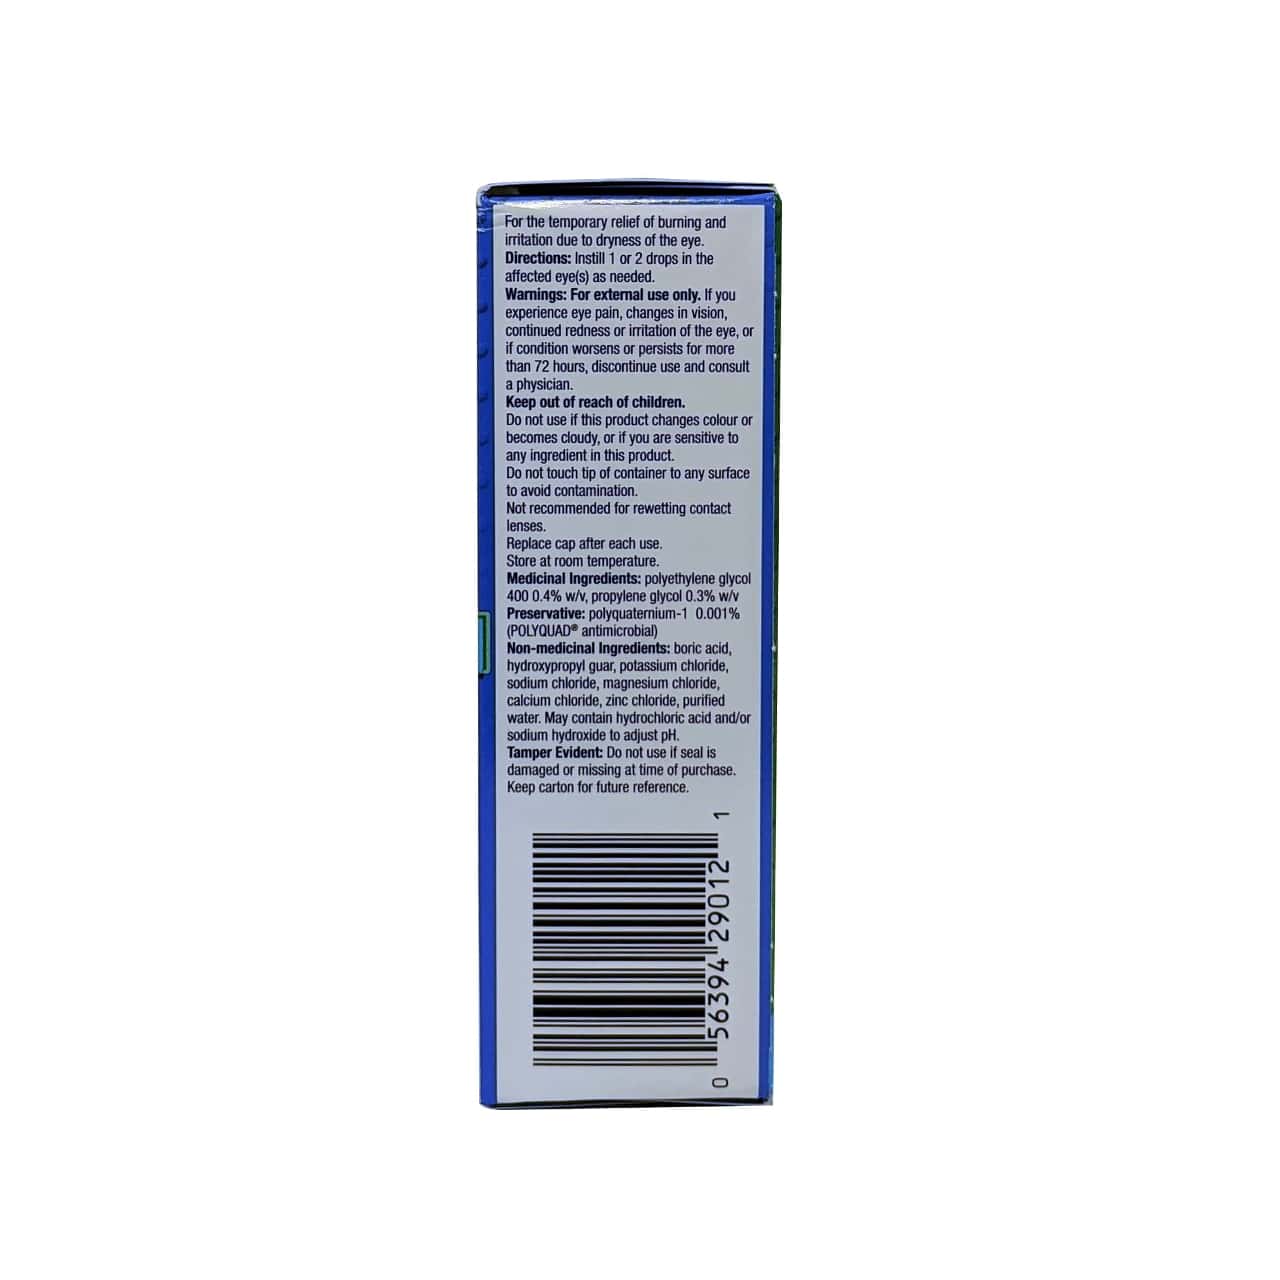 Product details, ingredients, directions, and warnings for Alcon Systane Original Lubricant Eye Drops in English